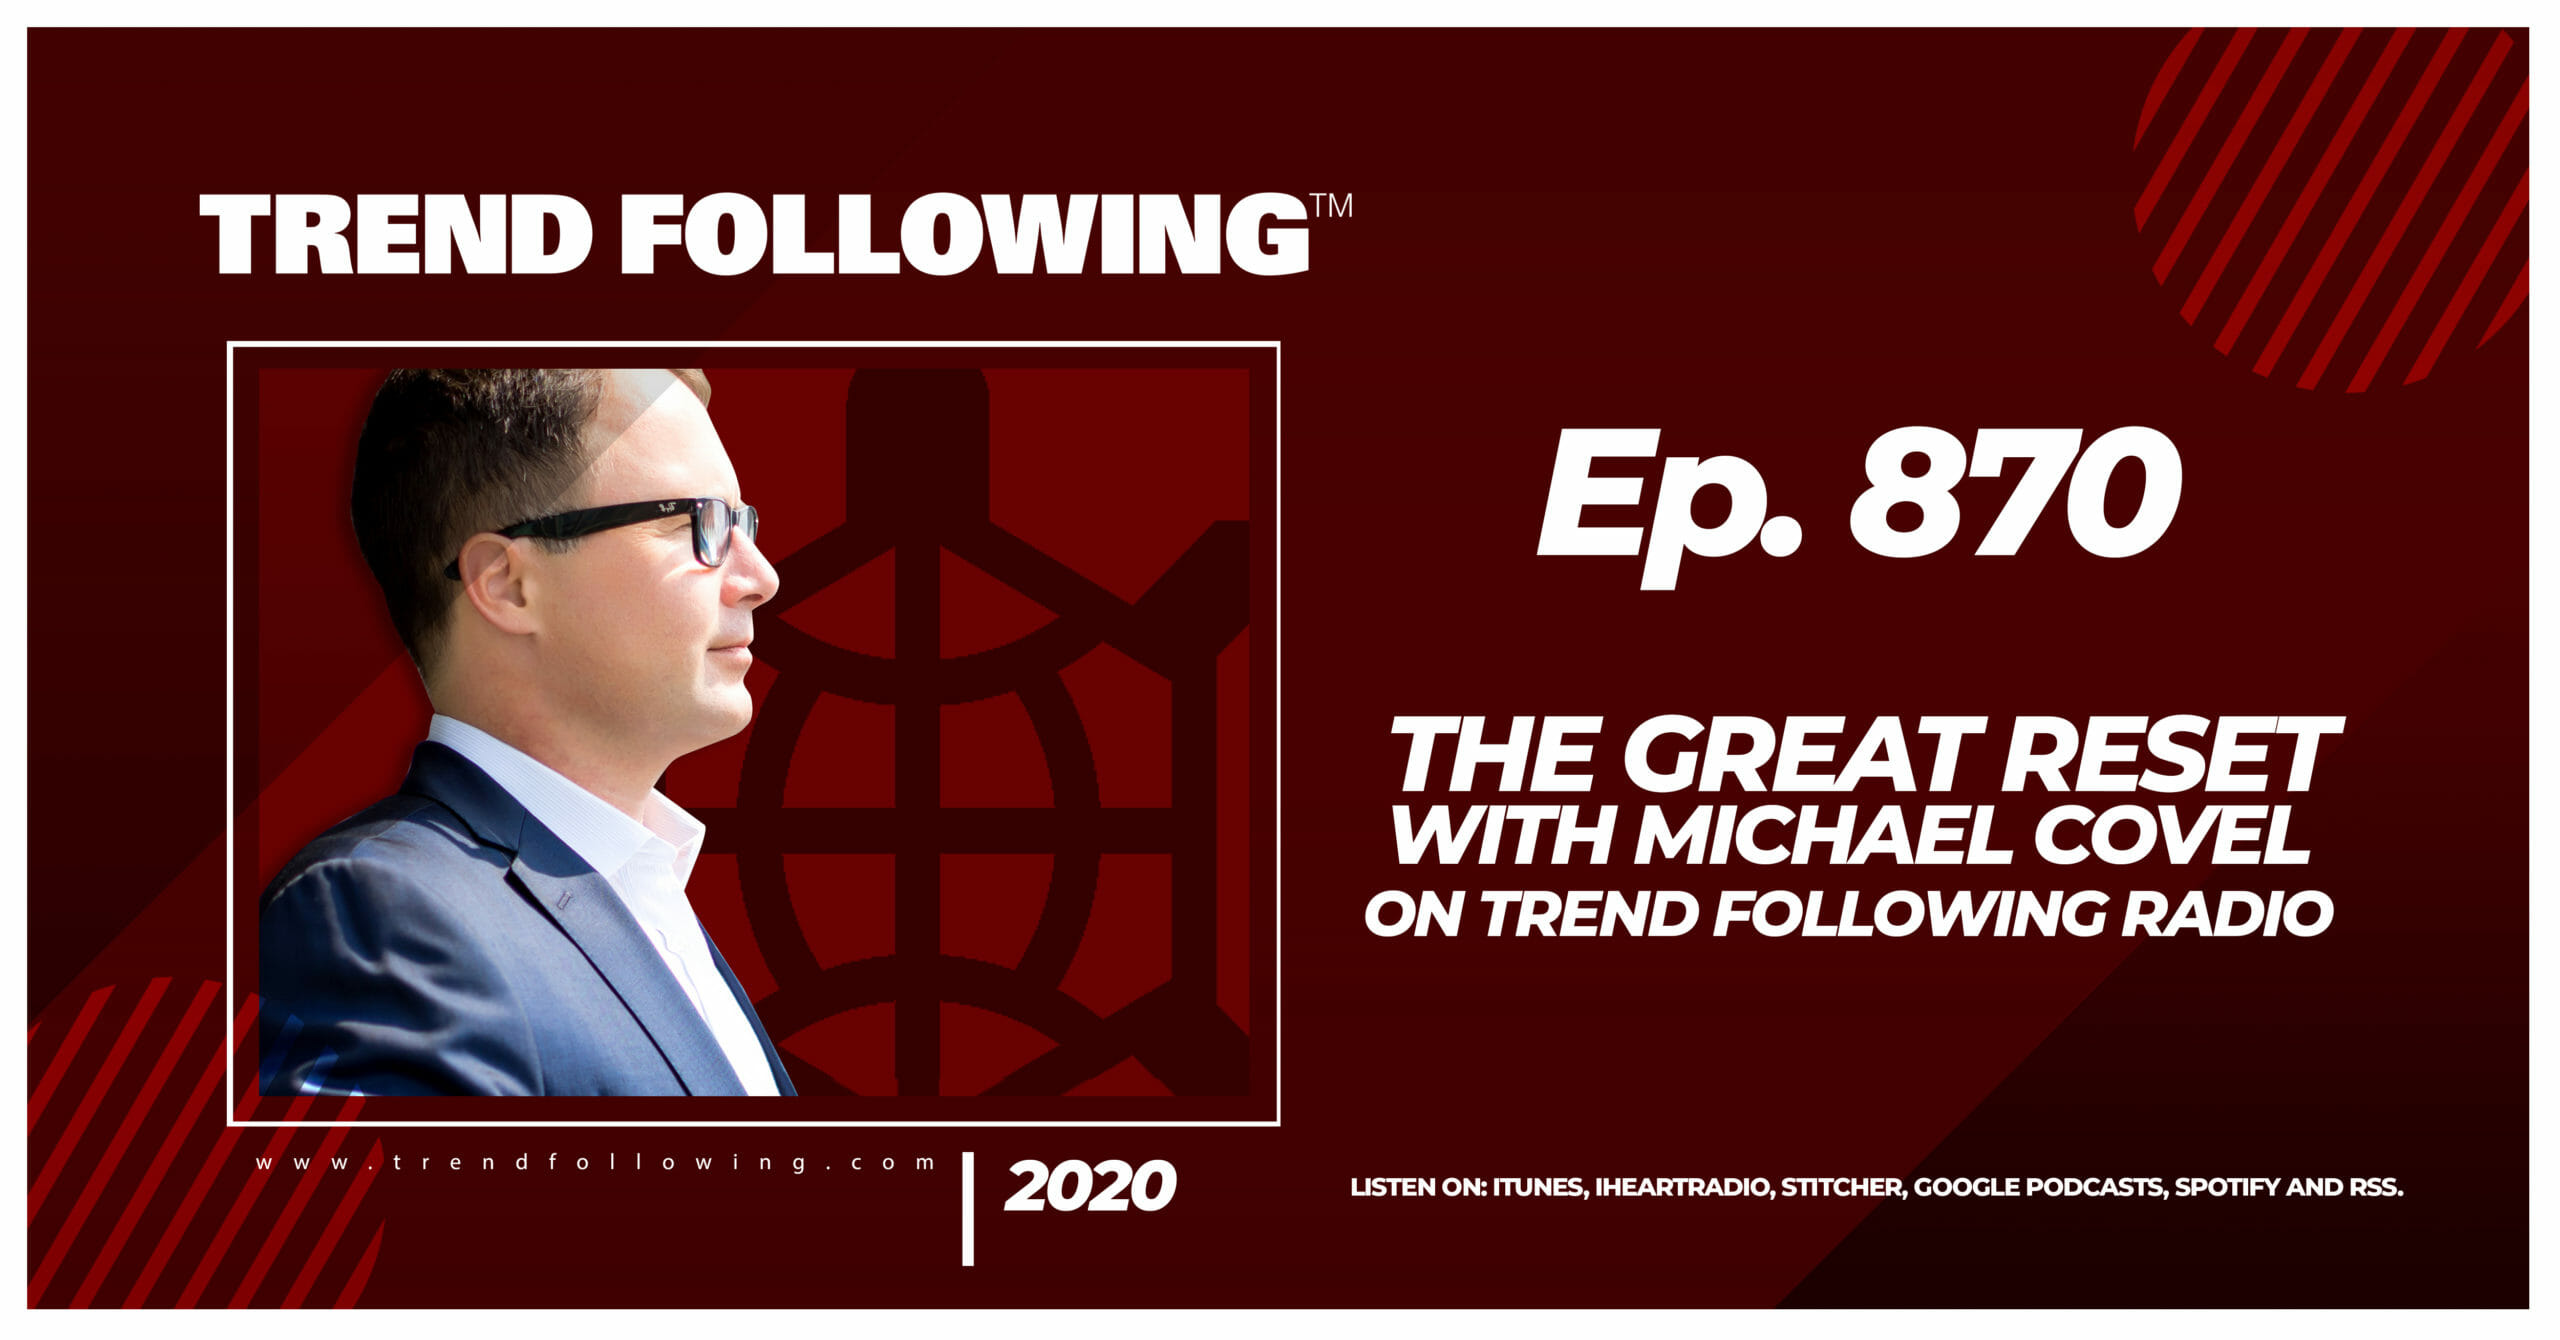 The Great Reset with Michael Covel on Trend Following Radio